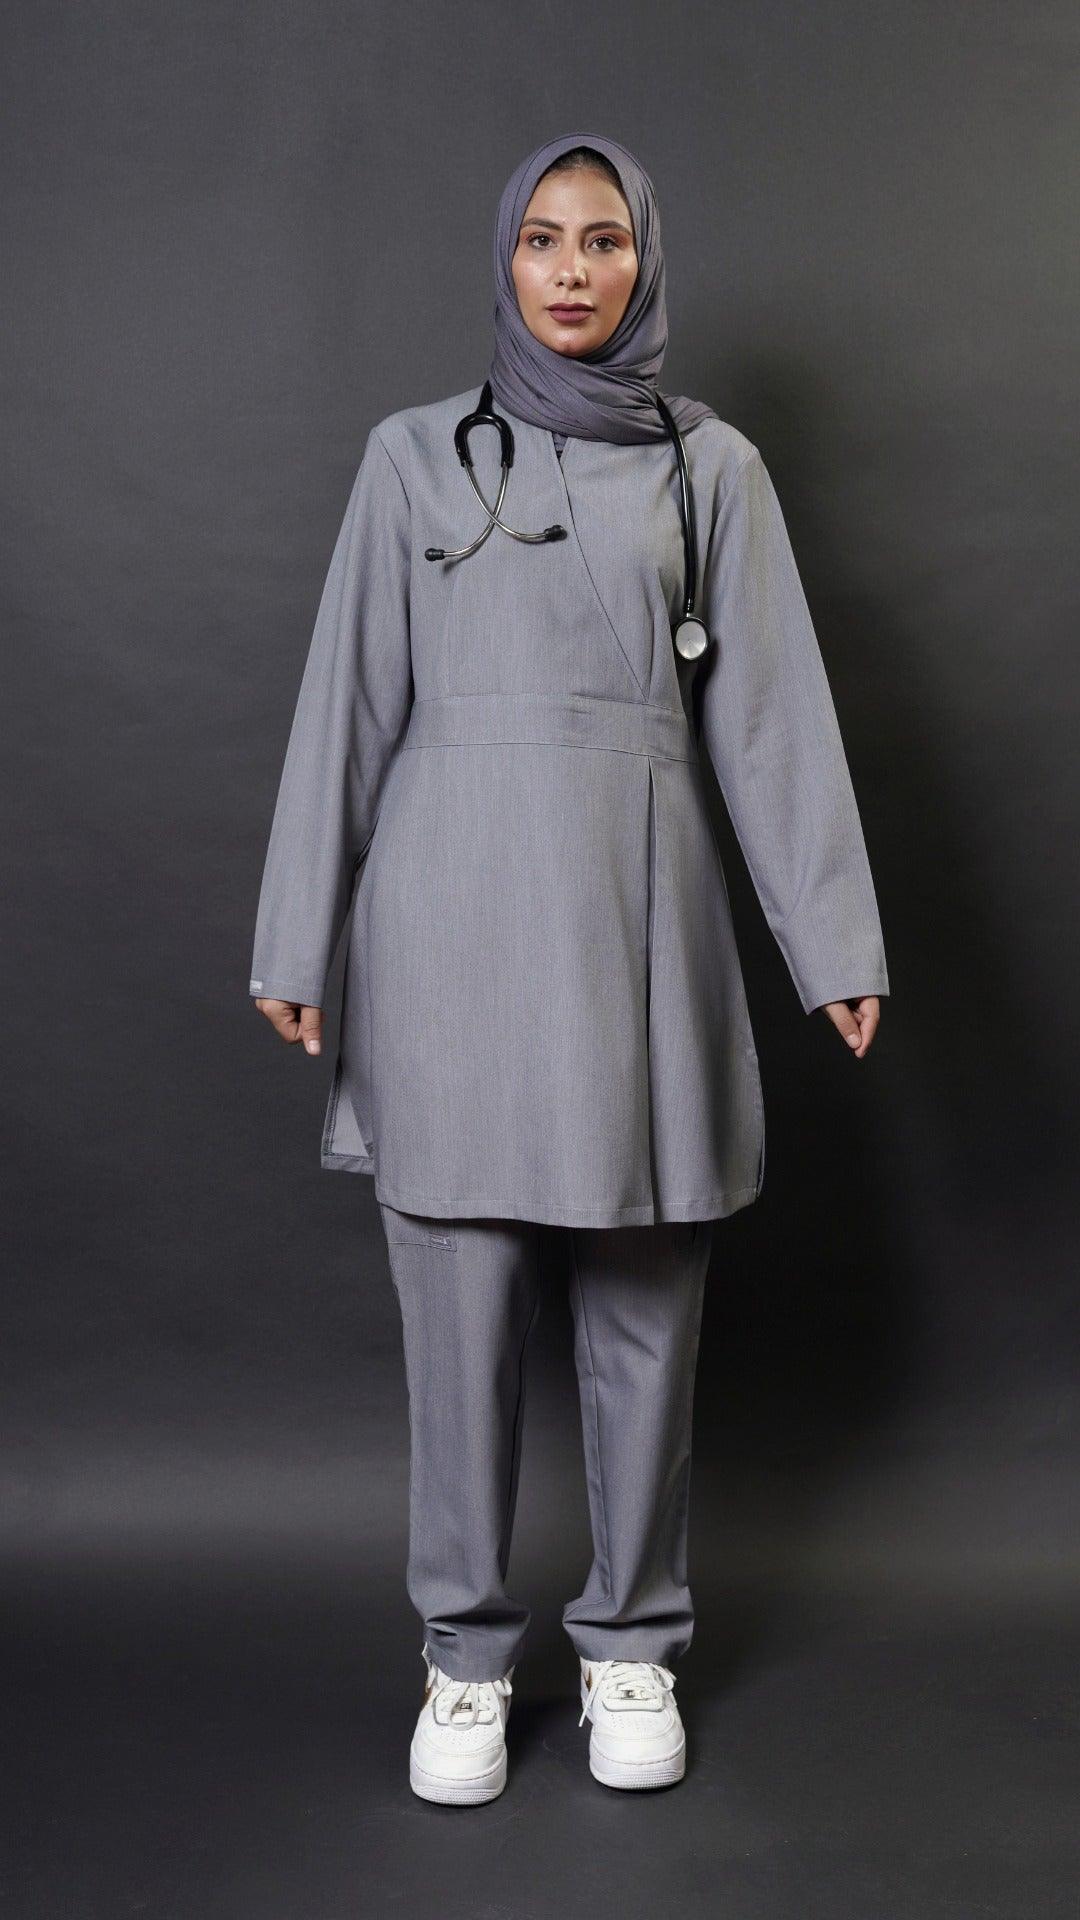   Extra long scrub top with long sleeves in grey perfect for women in healthcare! This top has a 36 inch length and flare top design for a modest look. It's also hijabi friendly, so you can feel comfortable and cover the lower bottom.